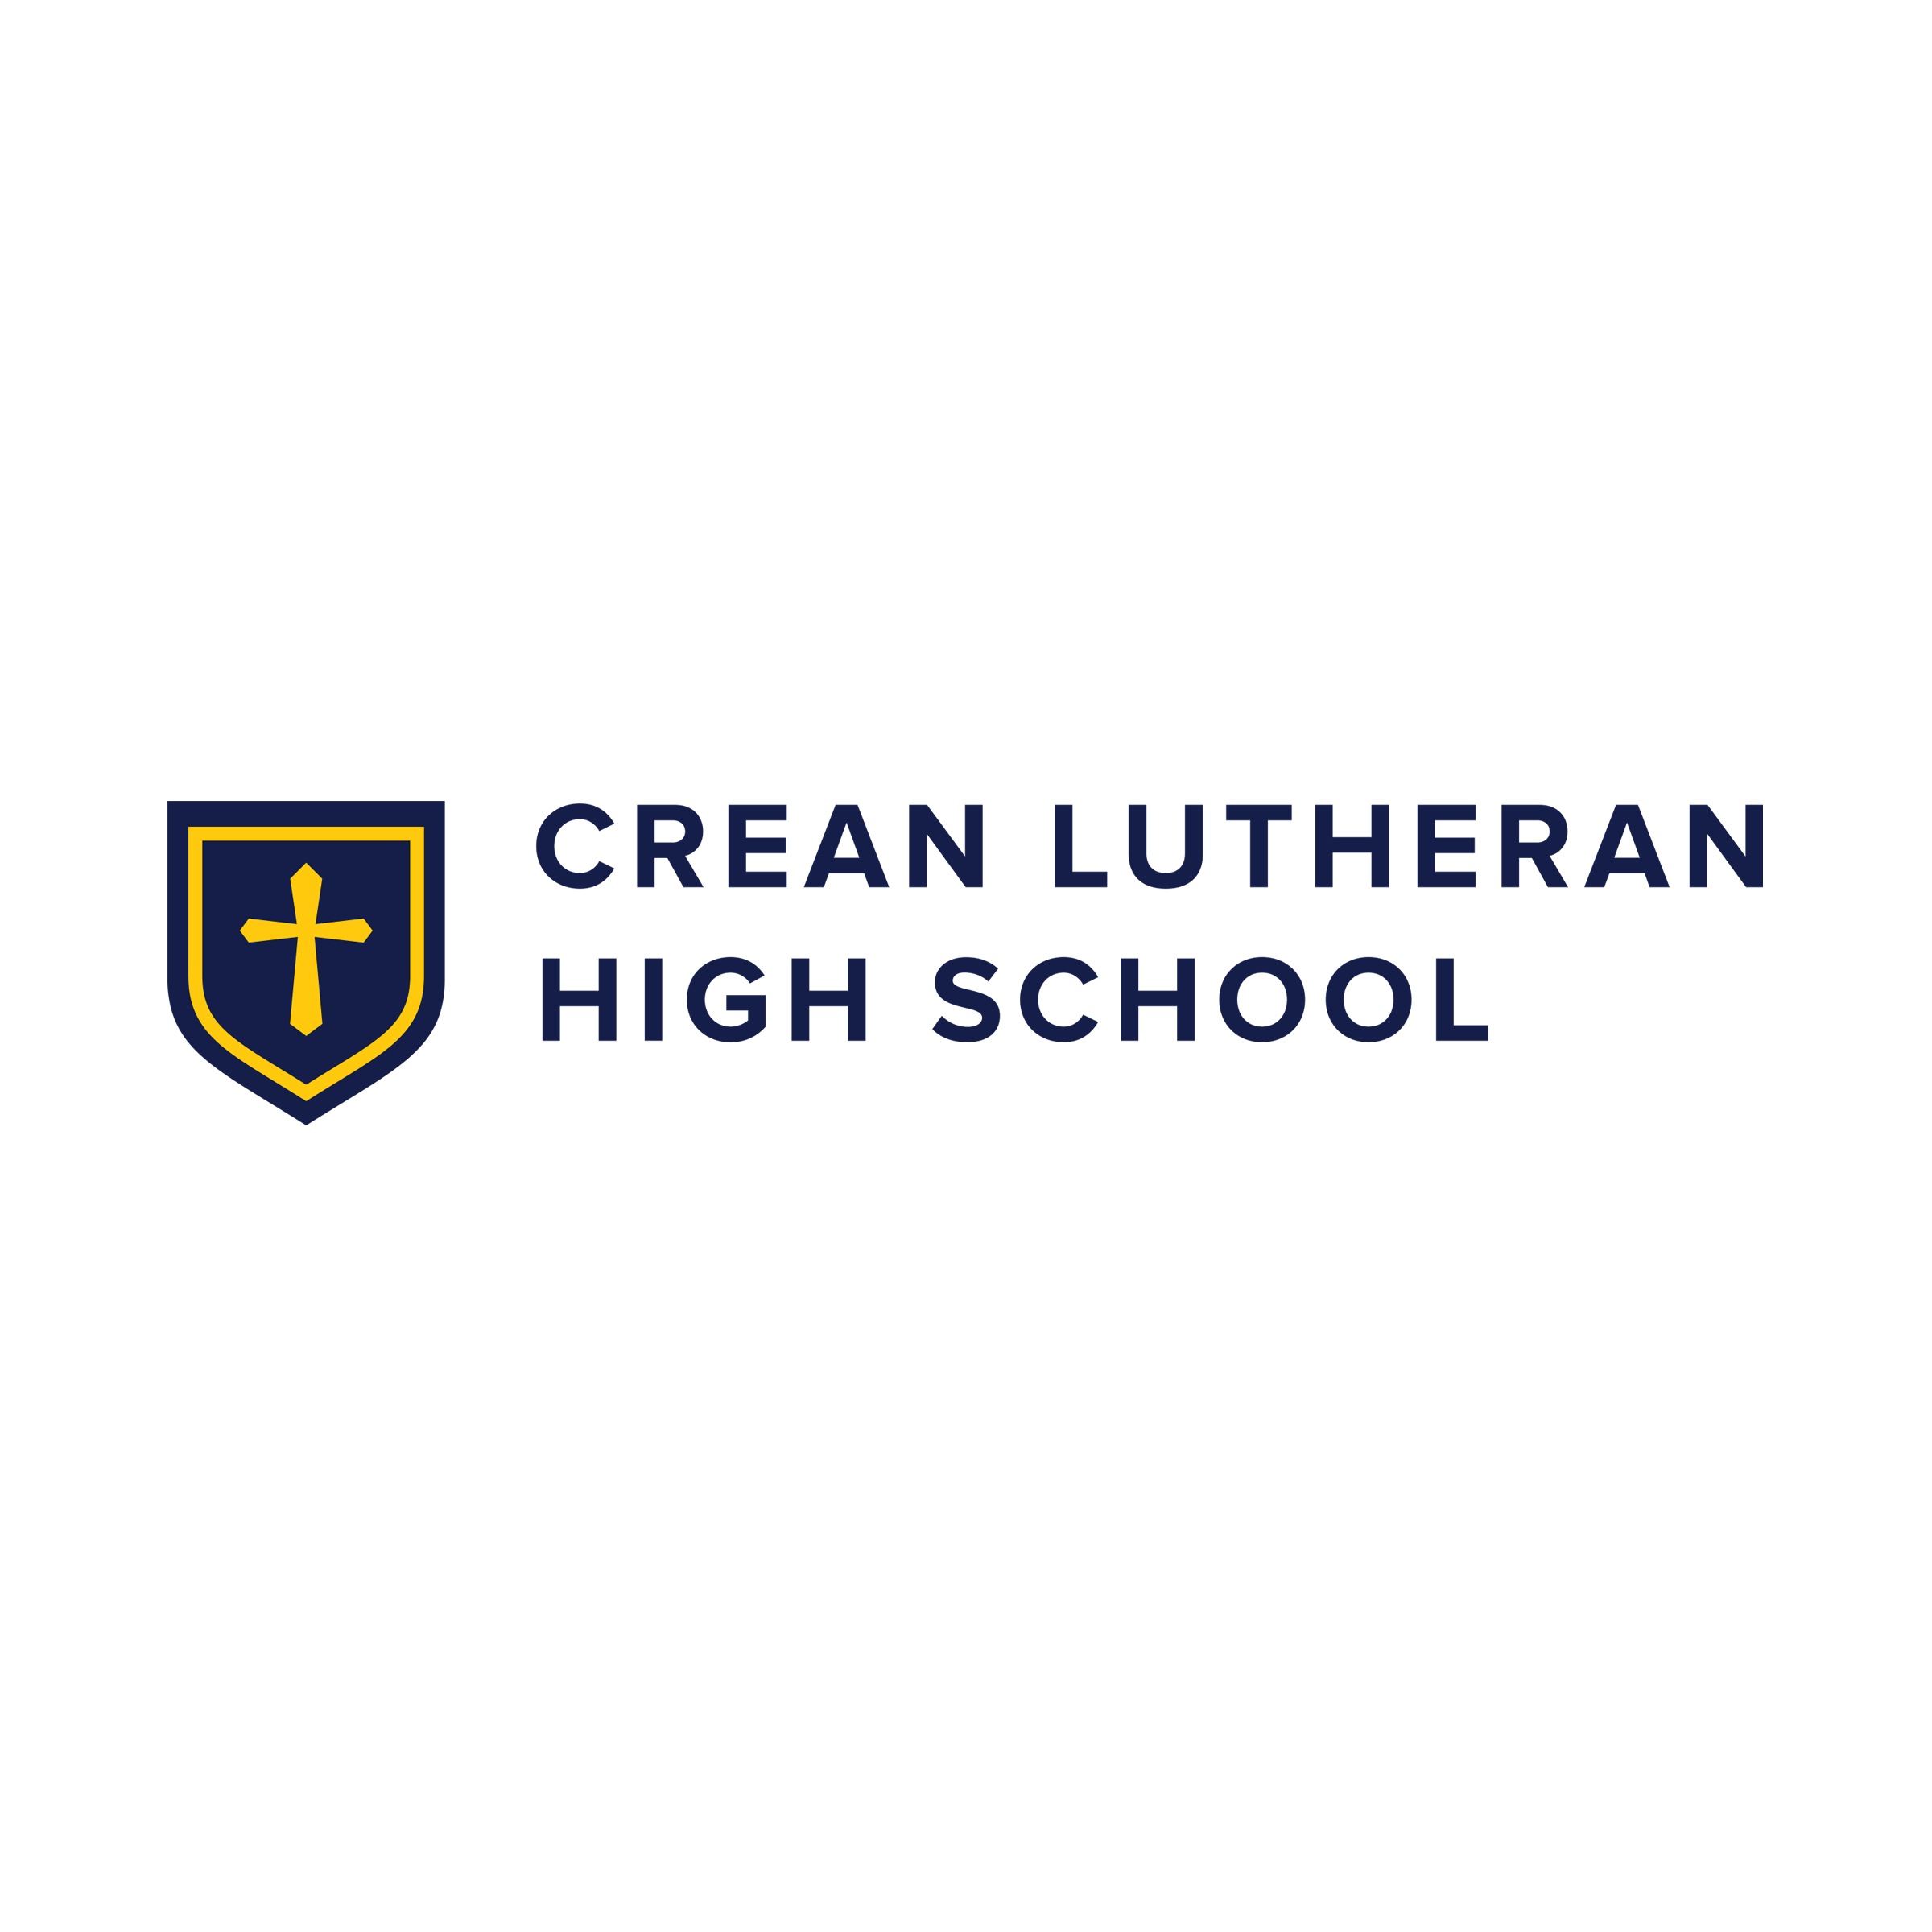 crean-lutheran-high-school-socal-moments-a-division-of-southern-california-news-group